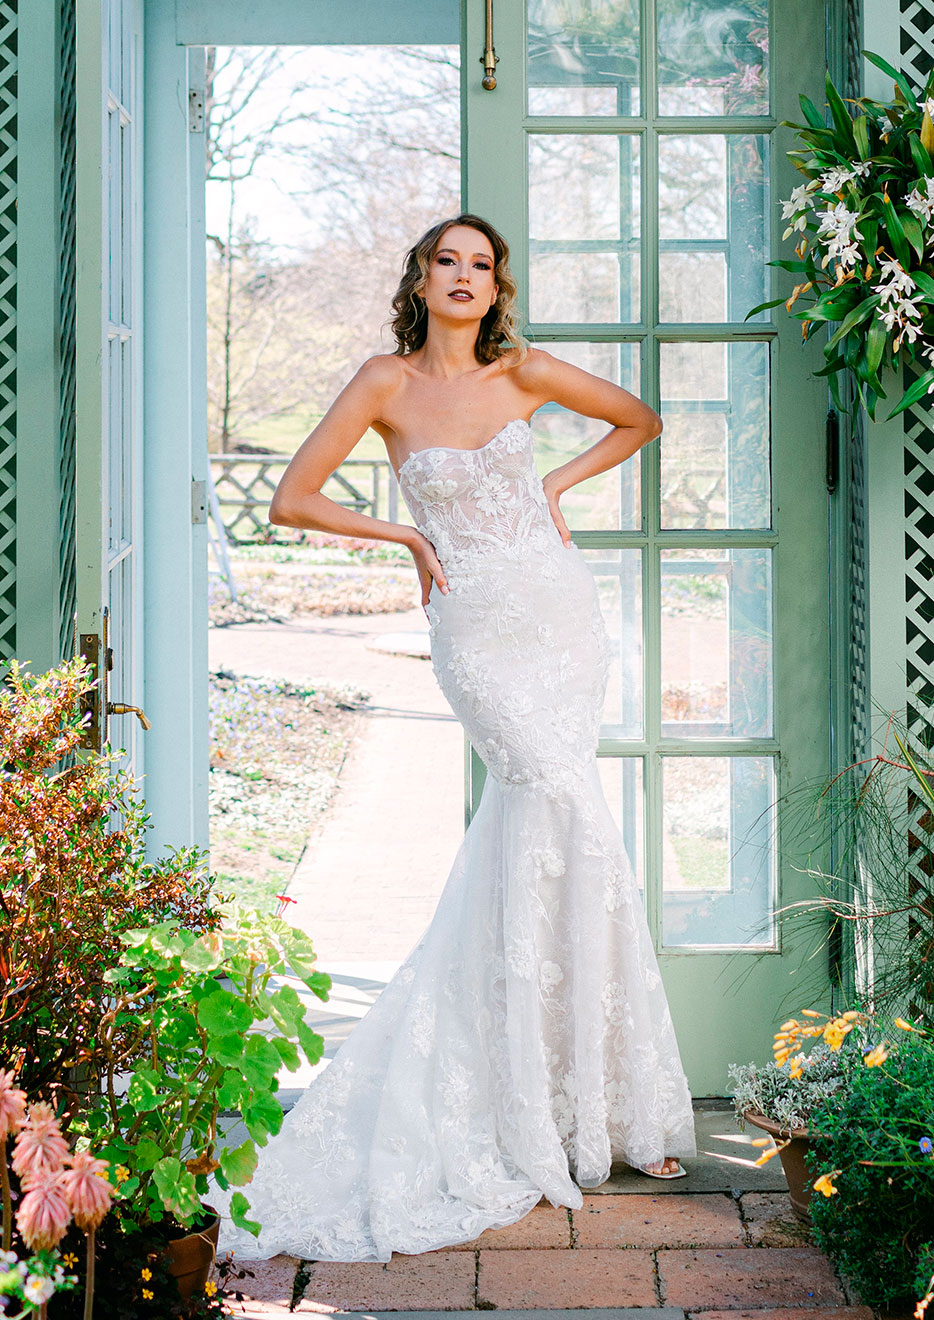 Wedding dress model Halo - Dress in Strapless style with trumpet gown and chapel train - Verdin New York